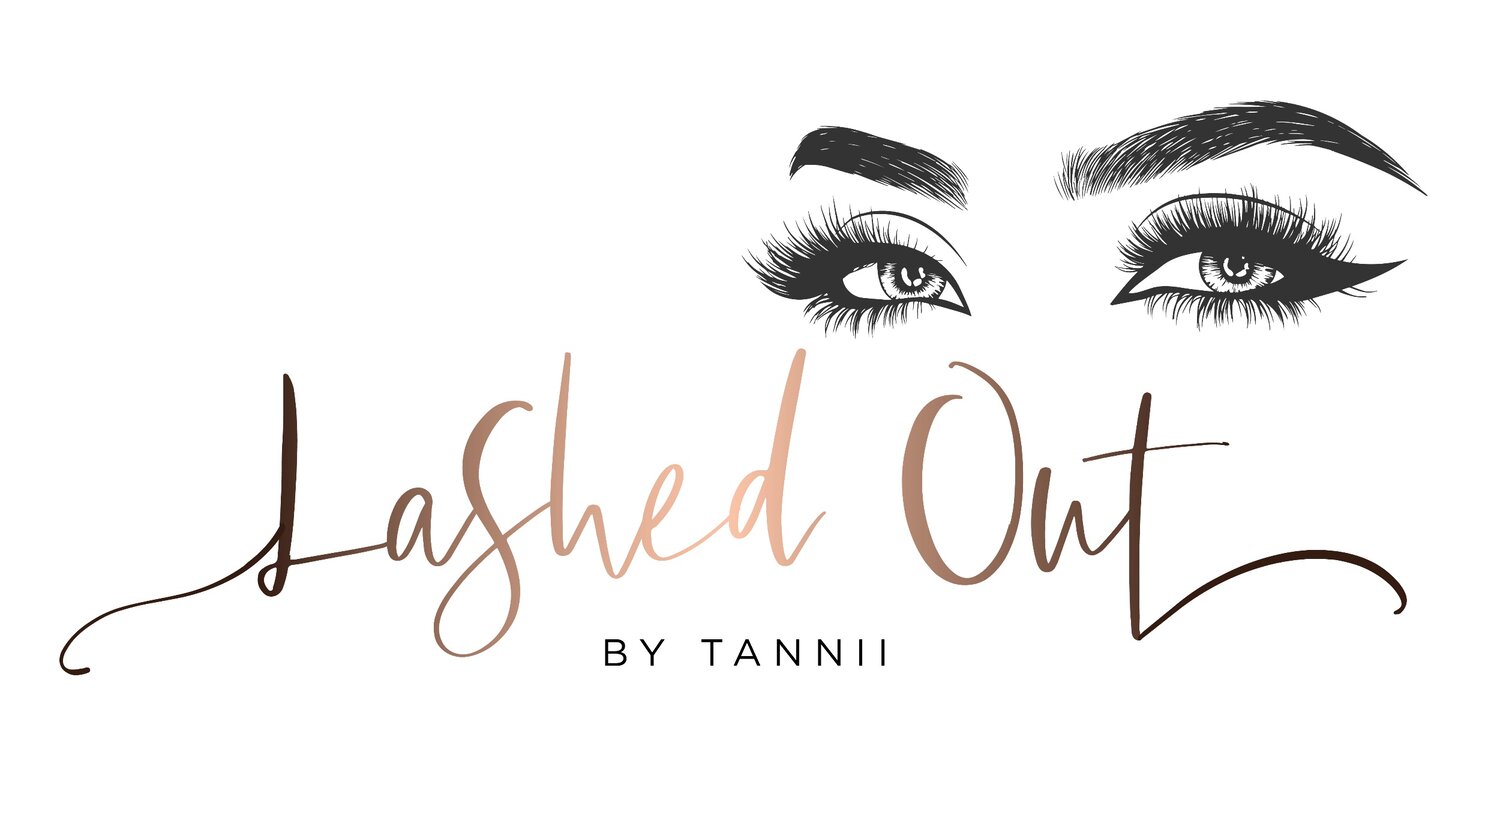 LASHED OUT BY TANNII